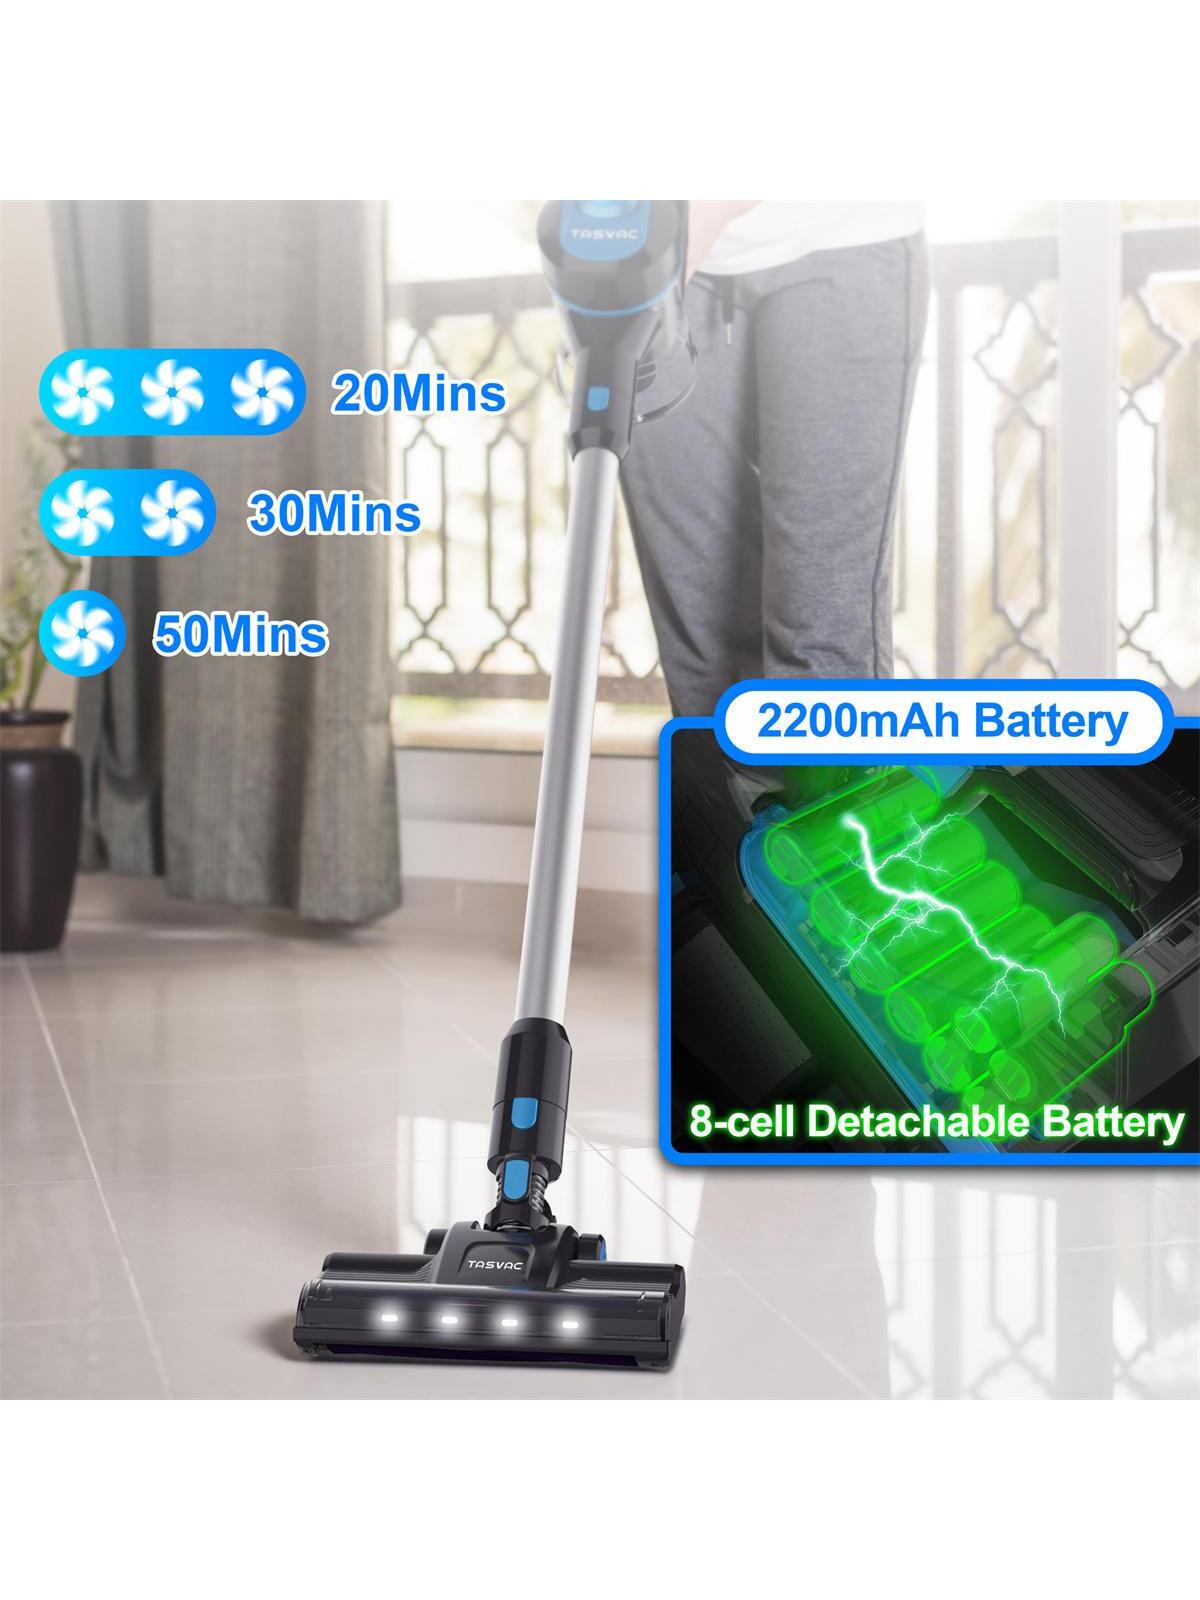 TASVAC Portable Stick Vacuum Cleaner, 260W Electric Broom Vacuum, 23 Kpa 6 in 1 Powerful Vacuum Cordless Lightweight, Up to 50min Runtime, 5 Cyclone Filter for Home, Office